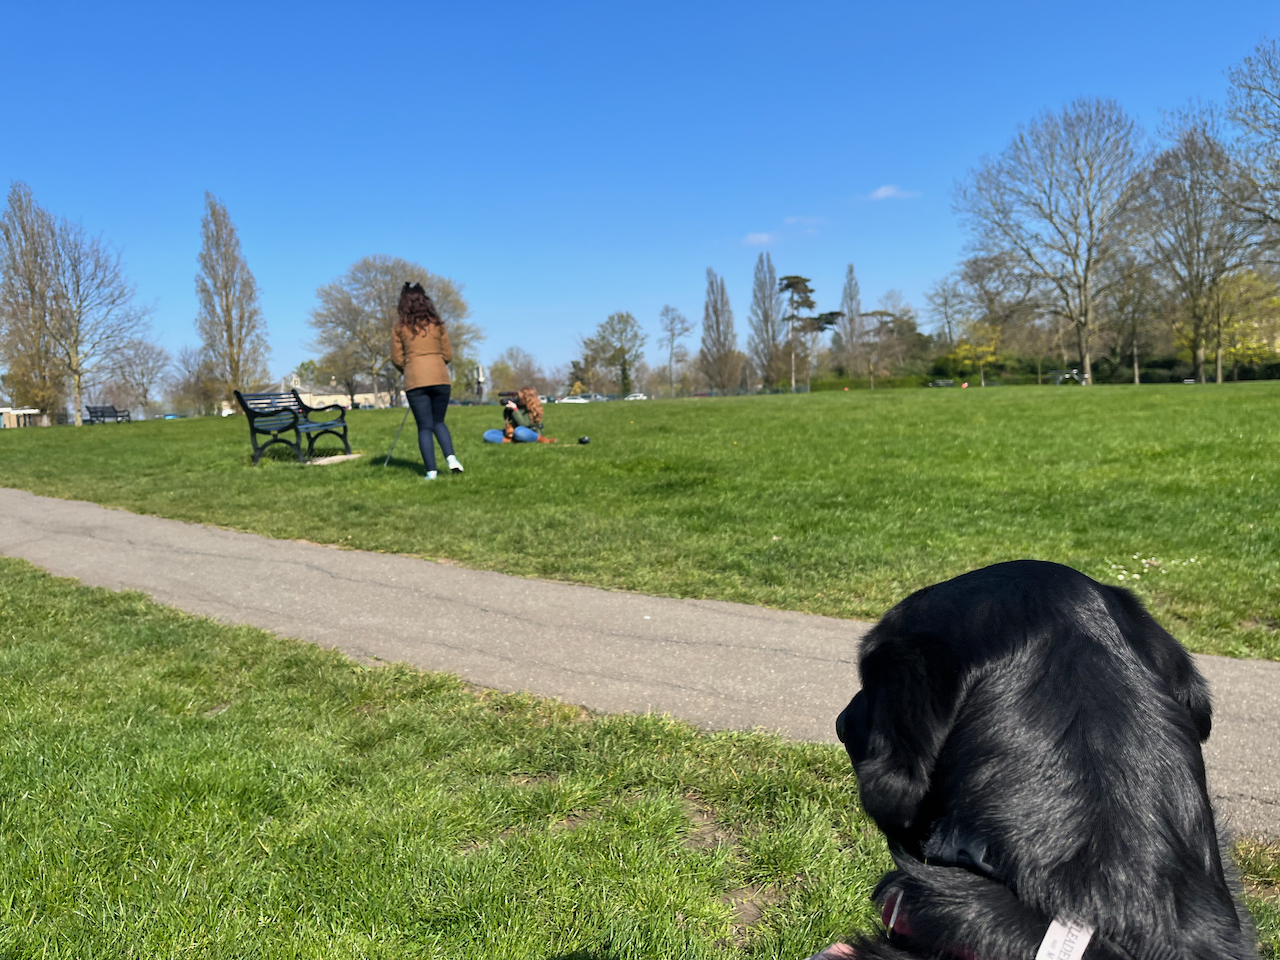 In Danson Park, black guide Rosie watches as Emily sits on the grass and films Taylor walking towards a bench using her long white cane.